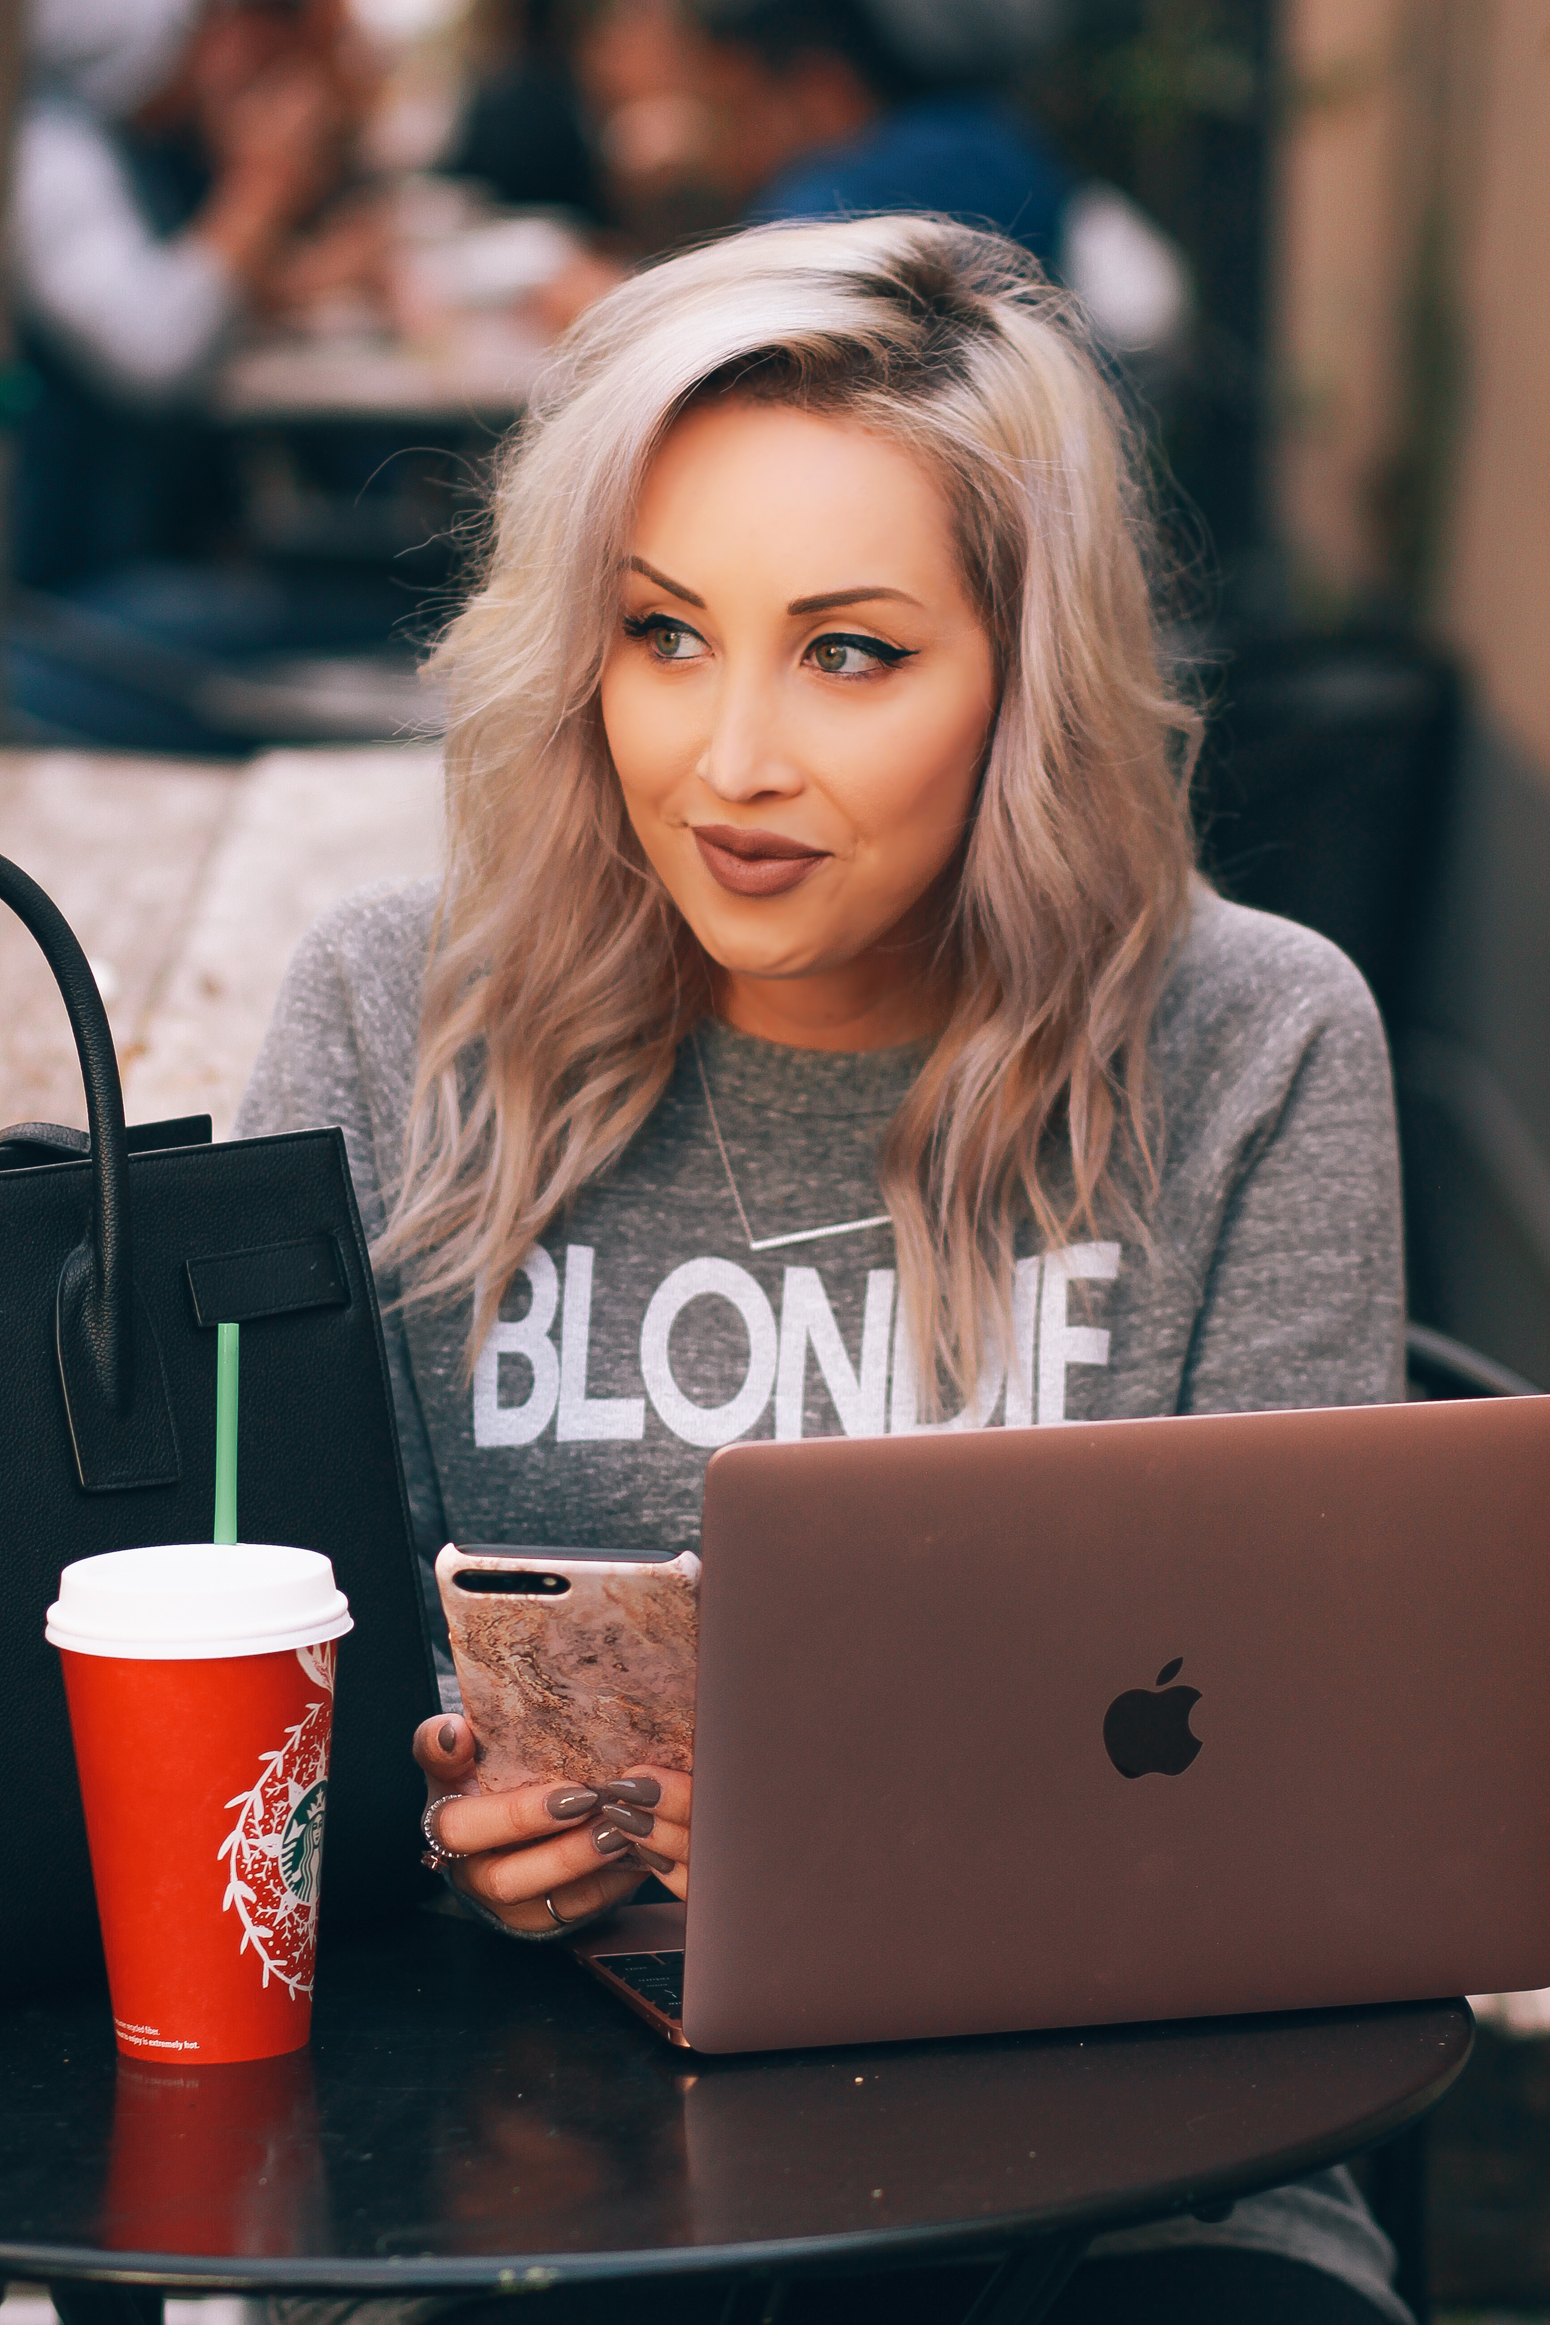 Blondie in the City | The Top 8 iPhone Apps Every Social Girl Needs